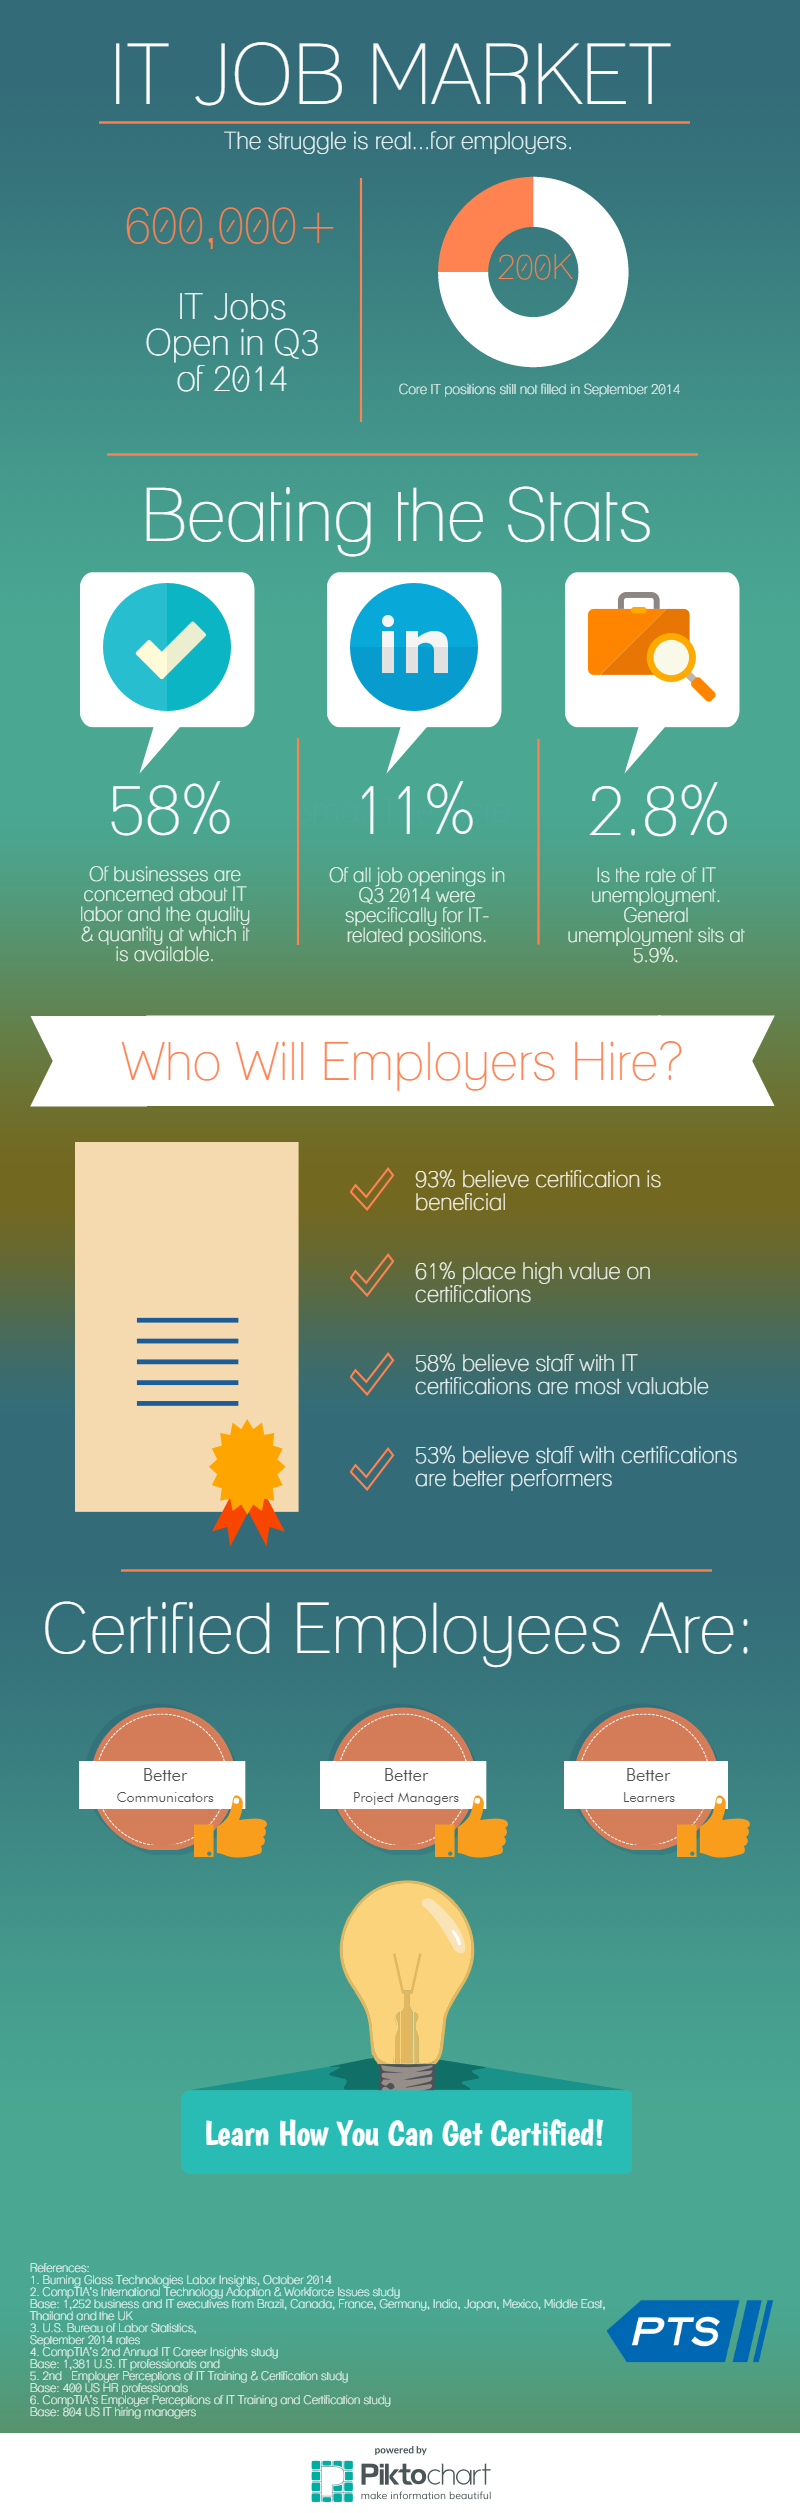 Infographic on the IT Job Market